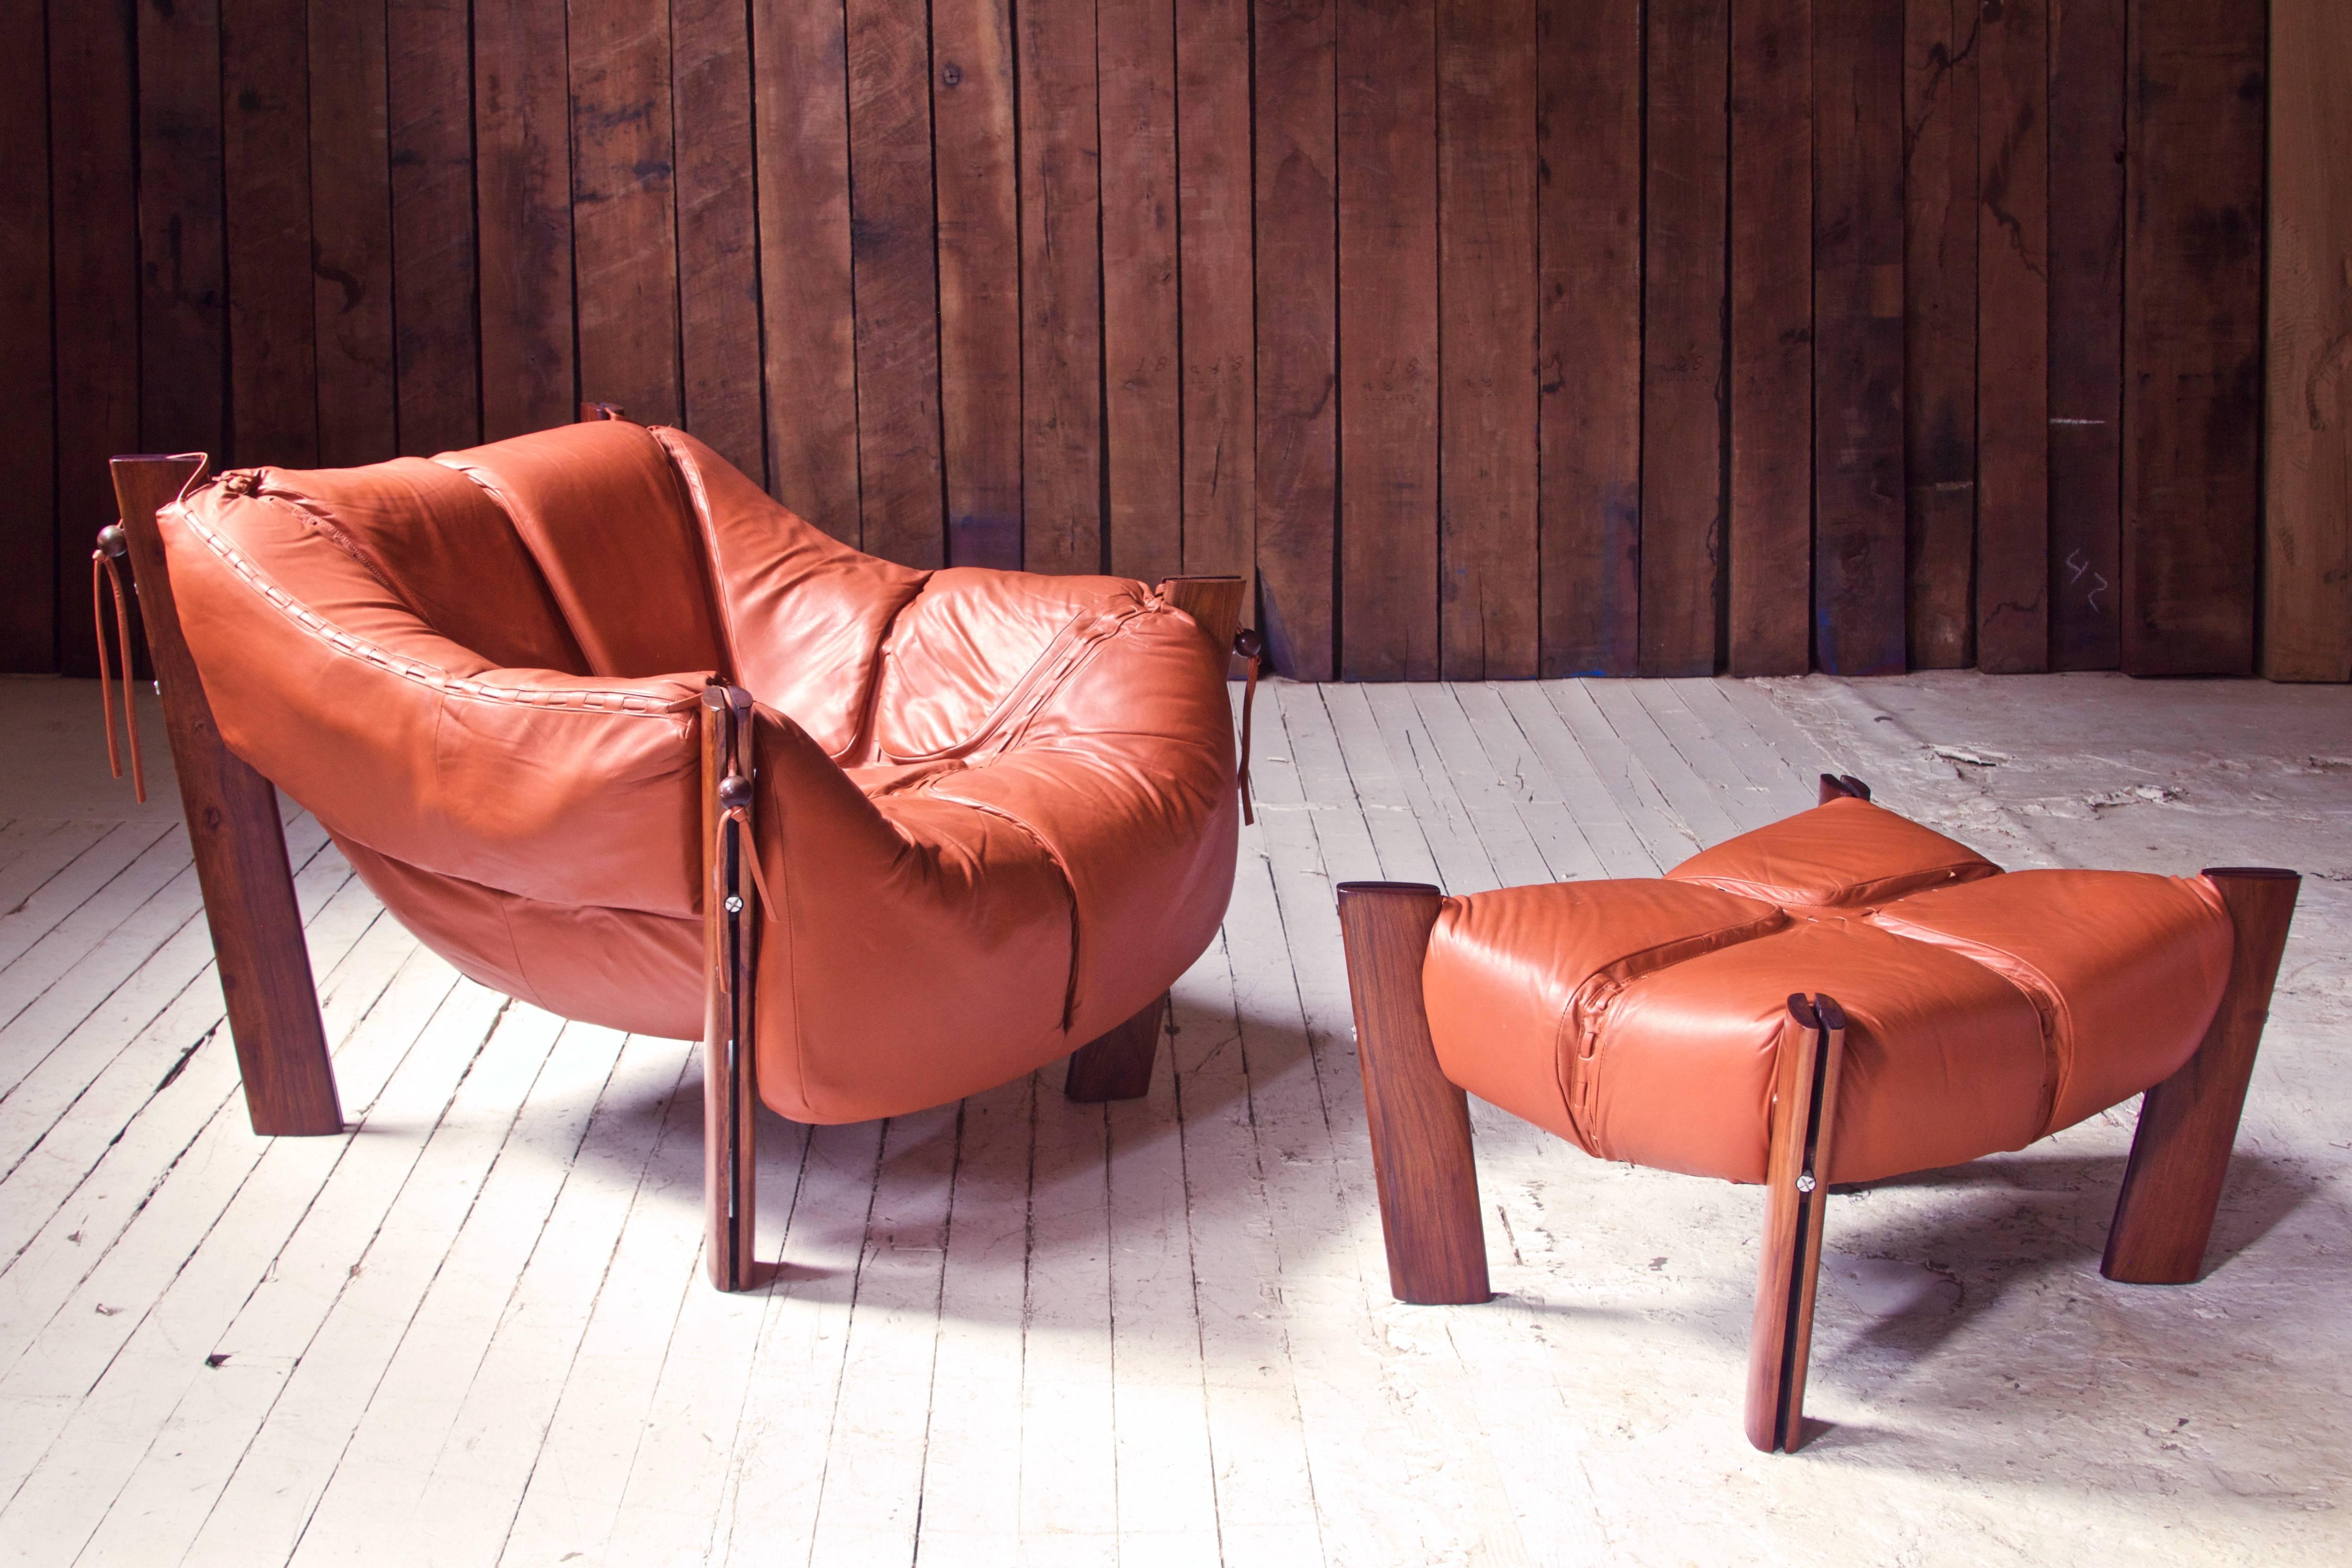 A well-preserved vintage Percival Lafer MP-211 Brazilian rosewood and leather lounge chair and ottoman made in Sao Paolo, Brazil by Lafer S.A Ind. e Com, circa 1975. This piece has come from the Carmel, NY estate of the original owner, has seen